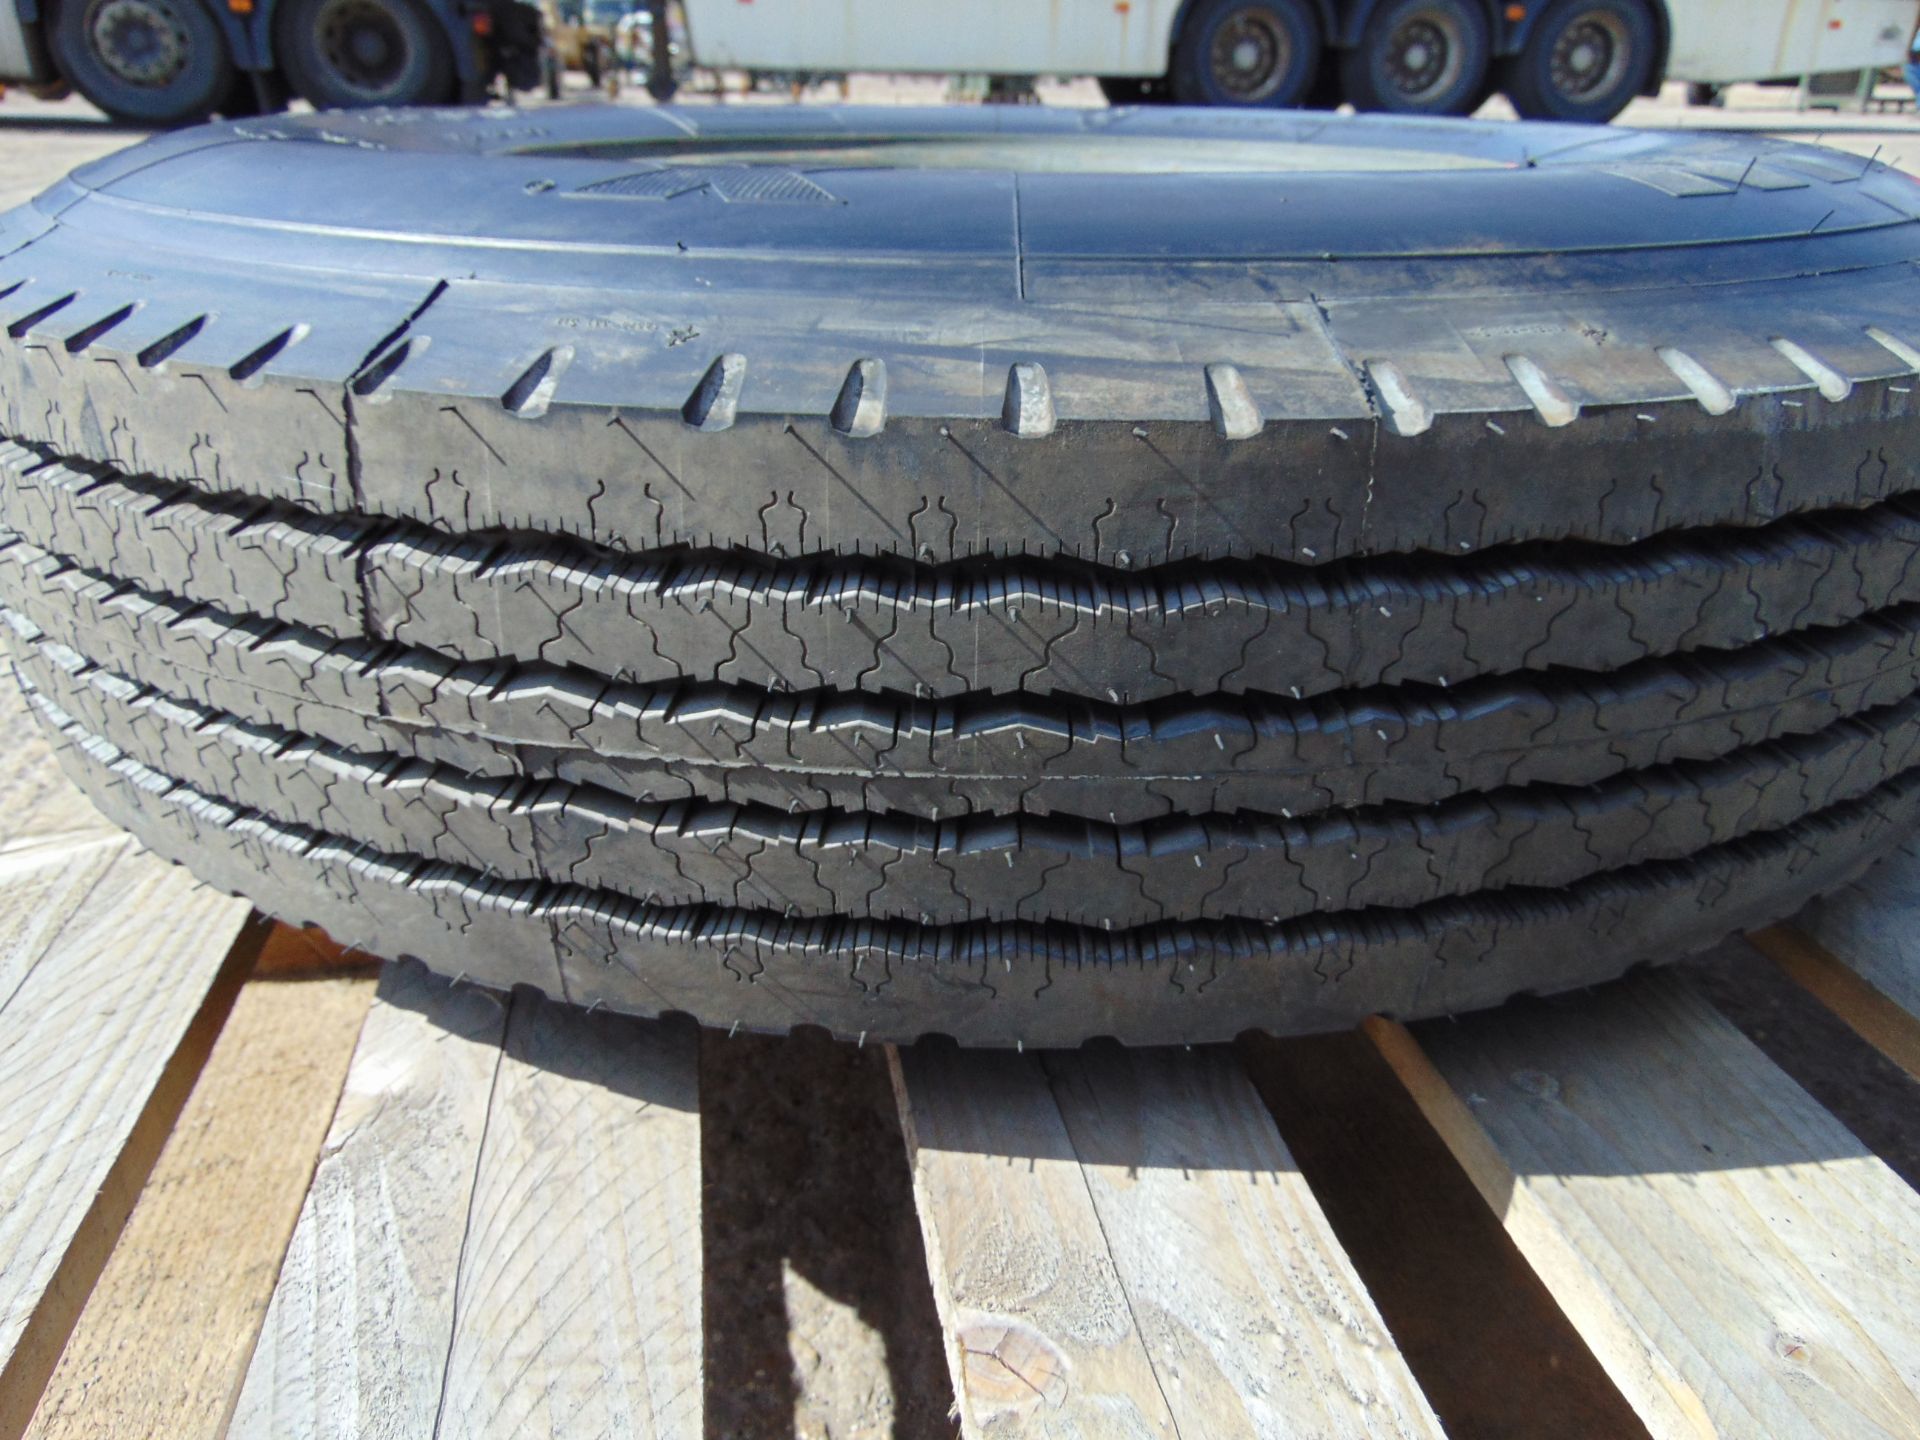 Michelin XZA 8.25 R16 Tyre with 6 Stud Rim - Image 7 of 7